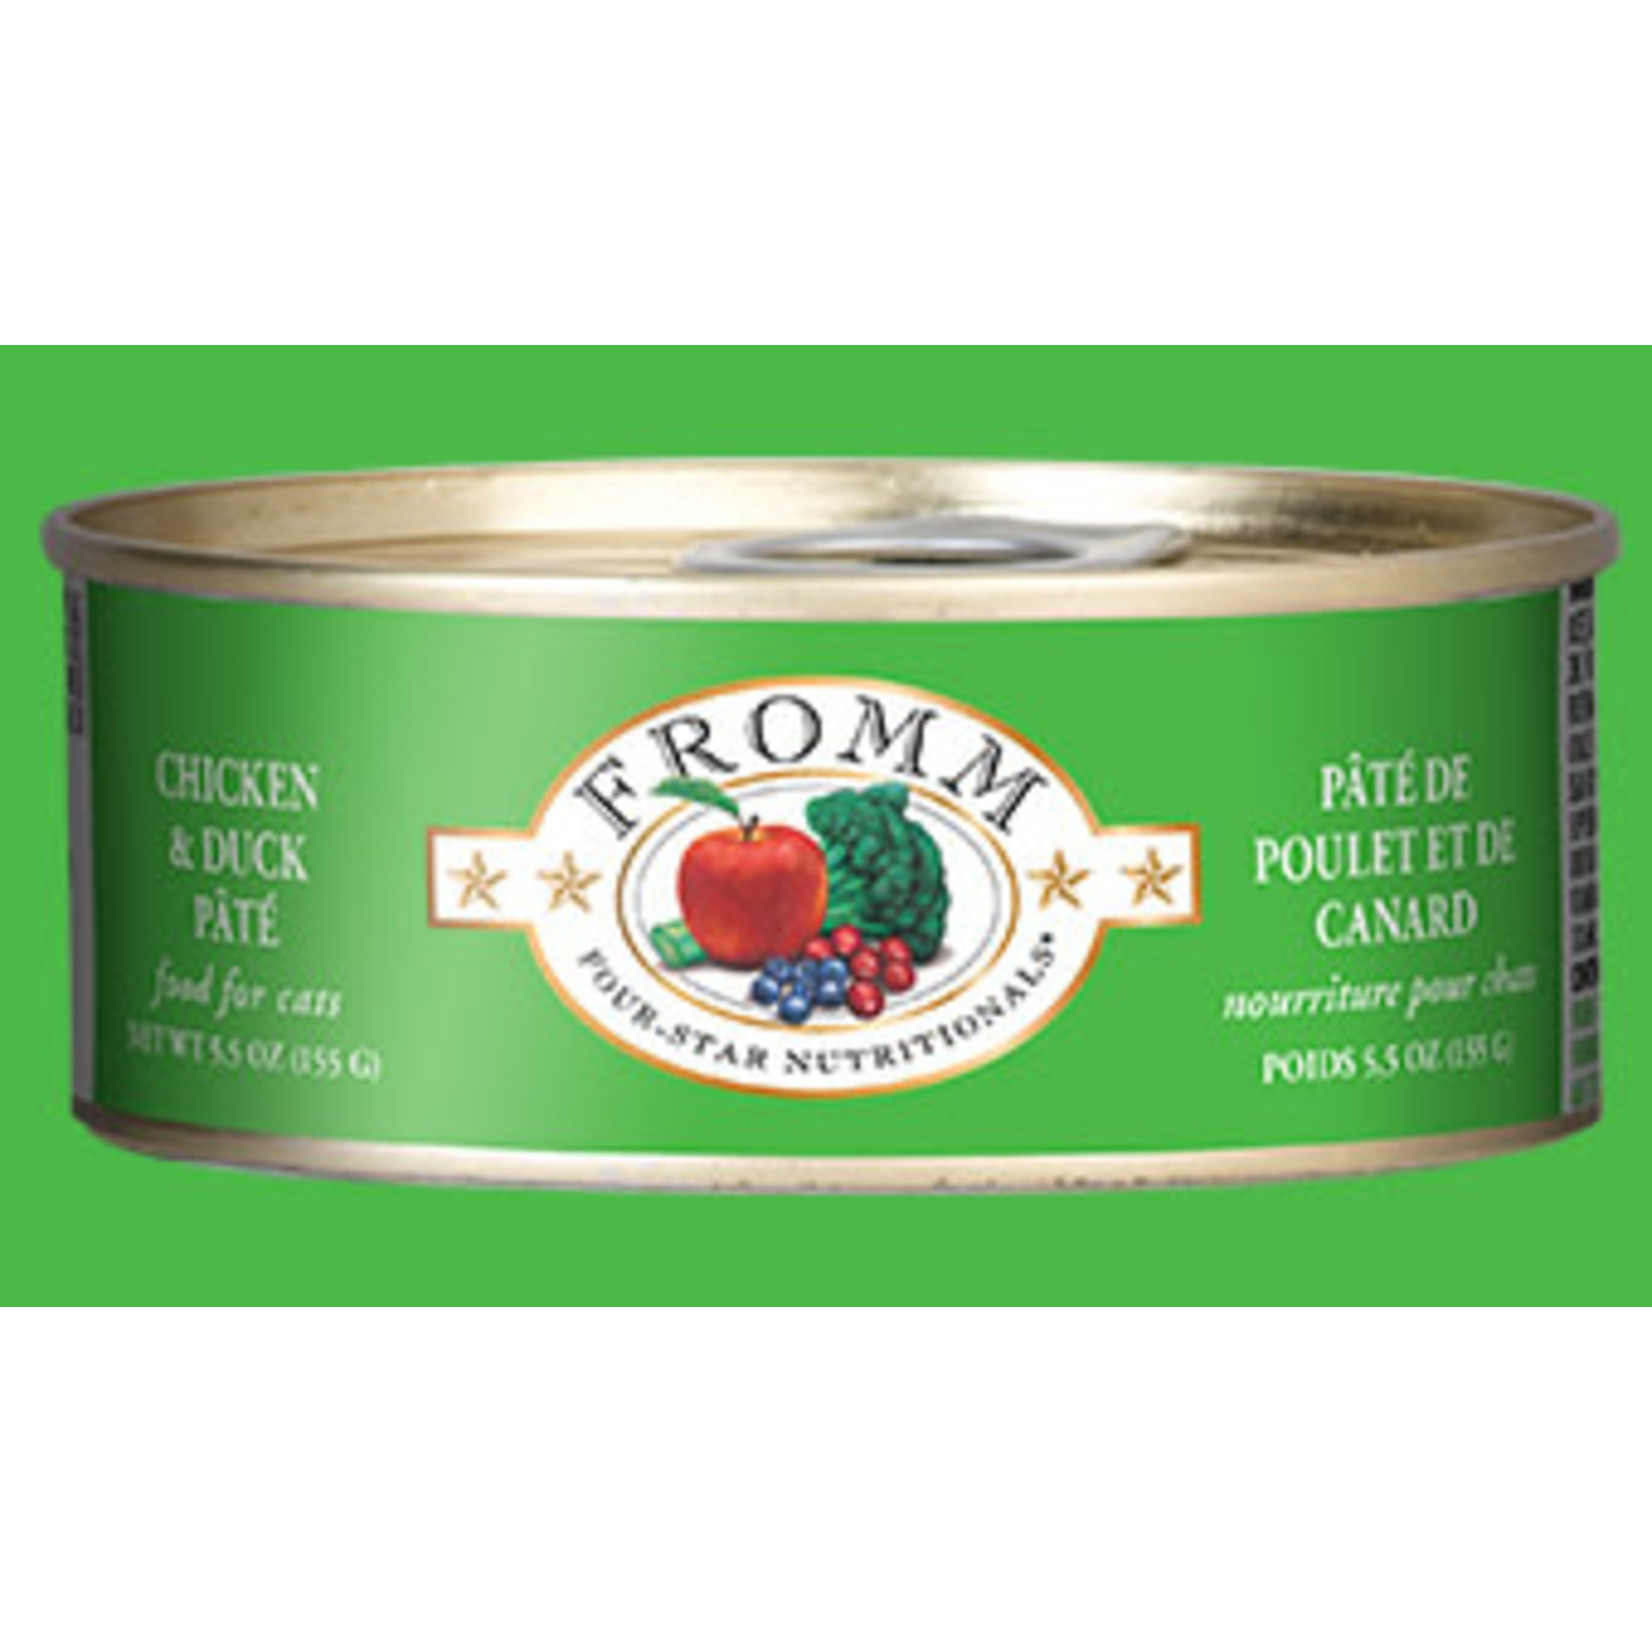 Fromm Family Fromm Chicken & Duck Pâté Canned Cat Food 5.5oz